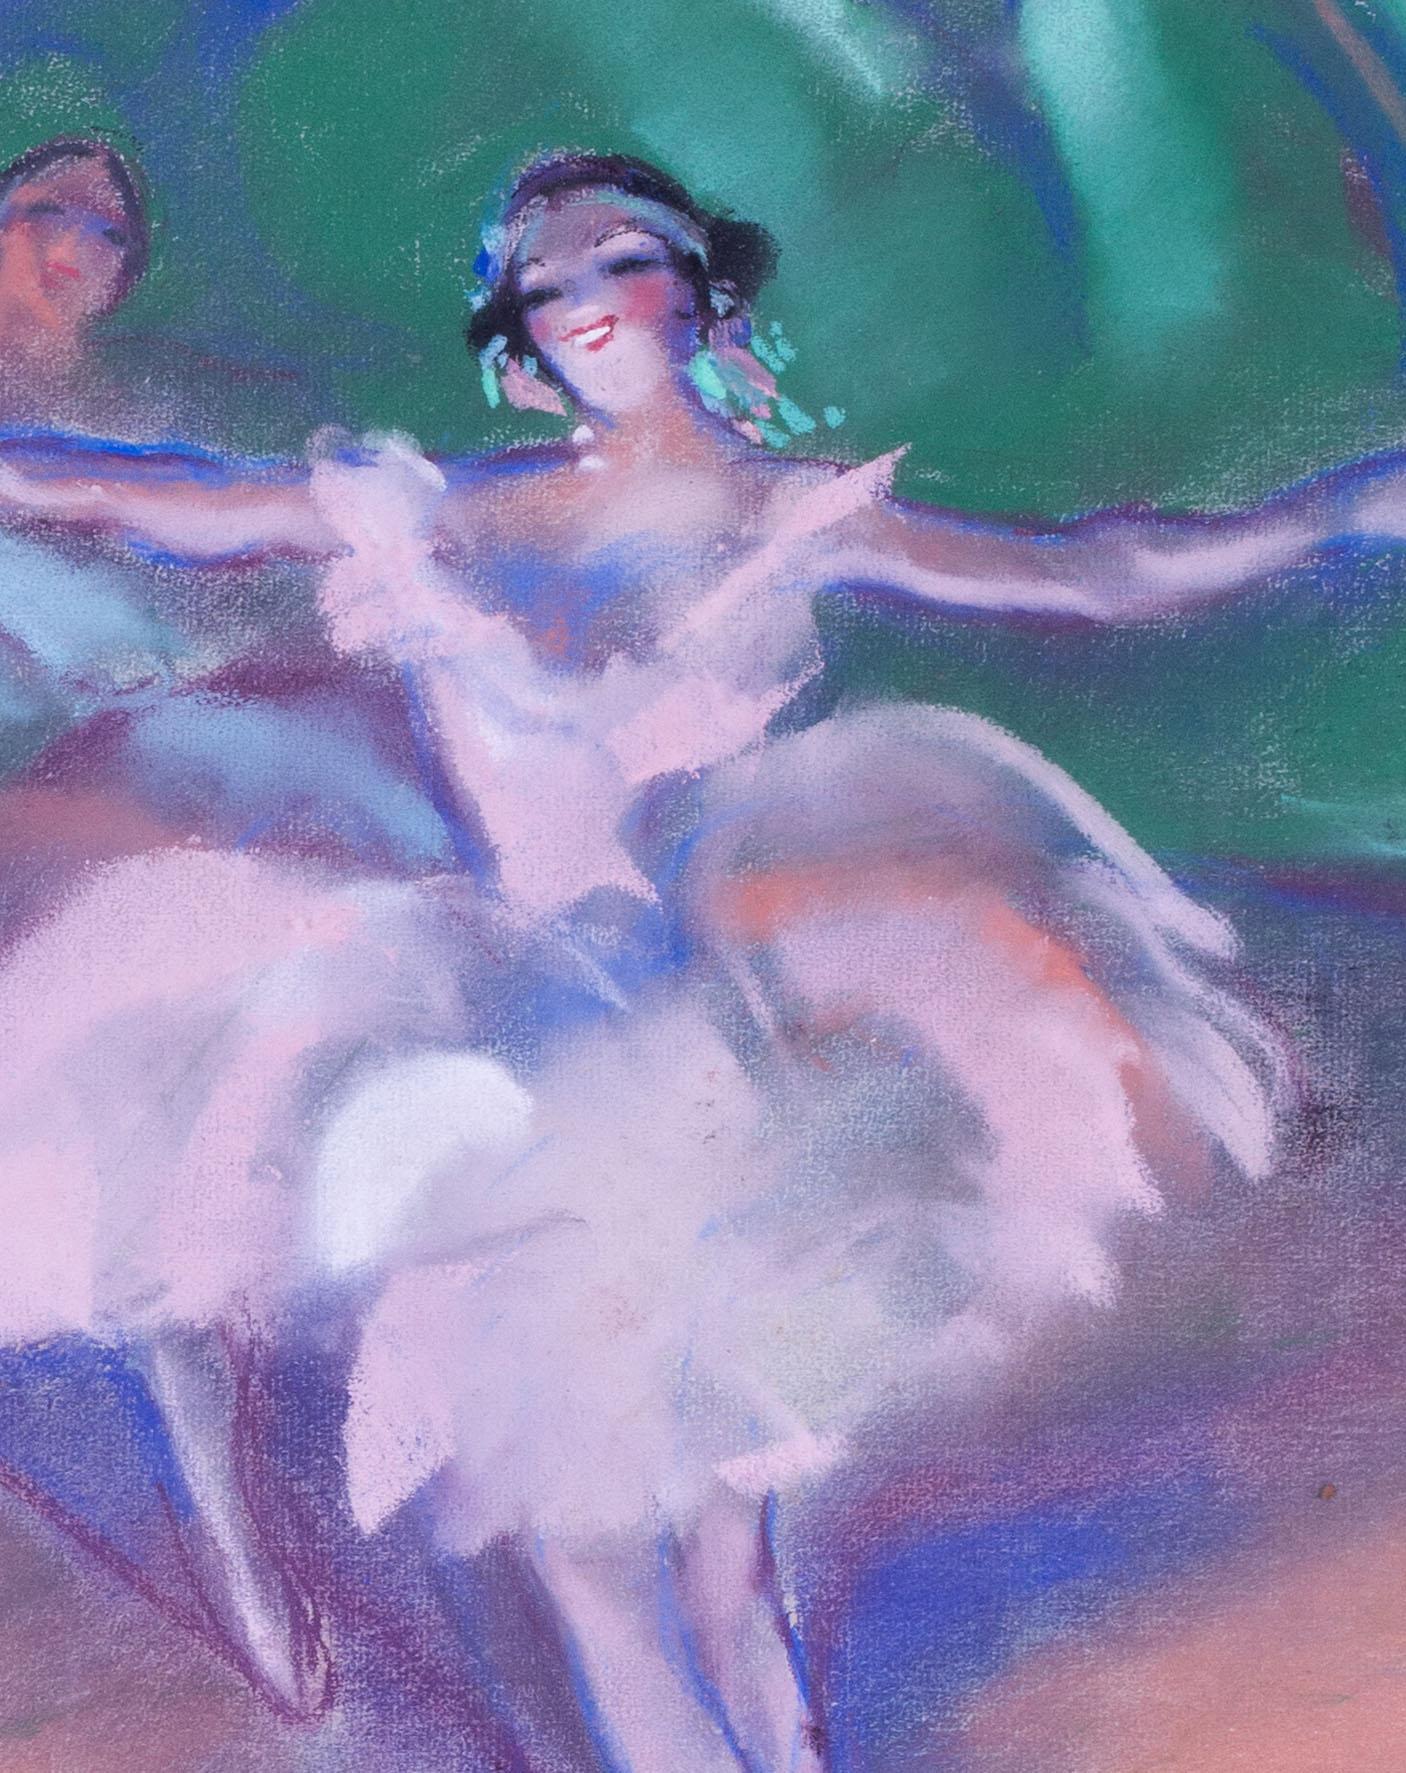 Charles Gir (French, 1883 – 1941)
Ballerinas on point
Pastel on paper
Signed ‘CH. Gir’ (lower left)
24 x 18.1/2 in. (61 x 46.8 cm.)

Charles Gir was born in Tours, France on November 1, 1883. He was a noted painter, watercolorist, pastellist,